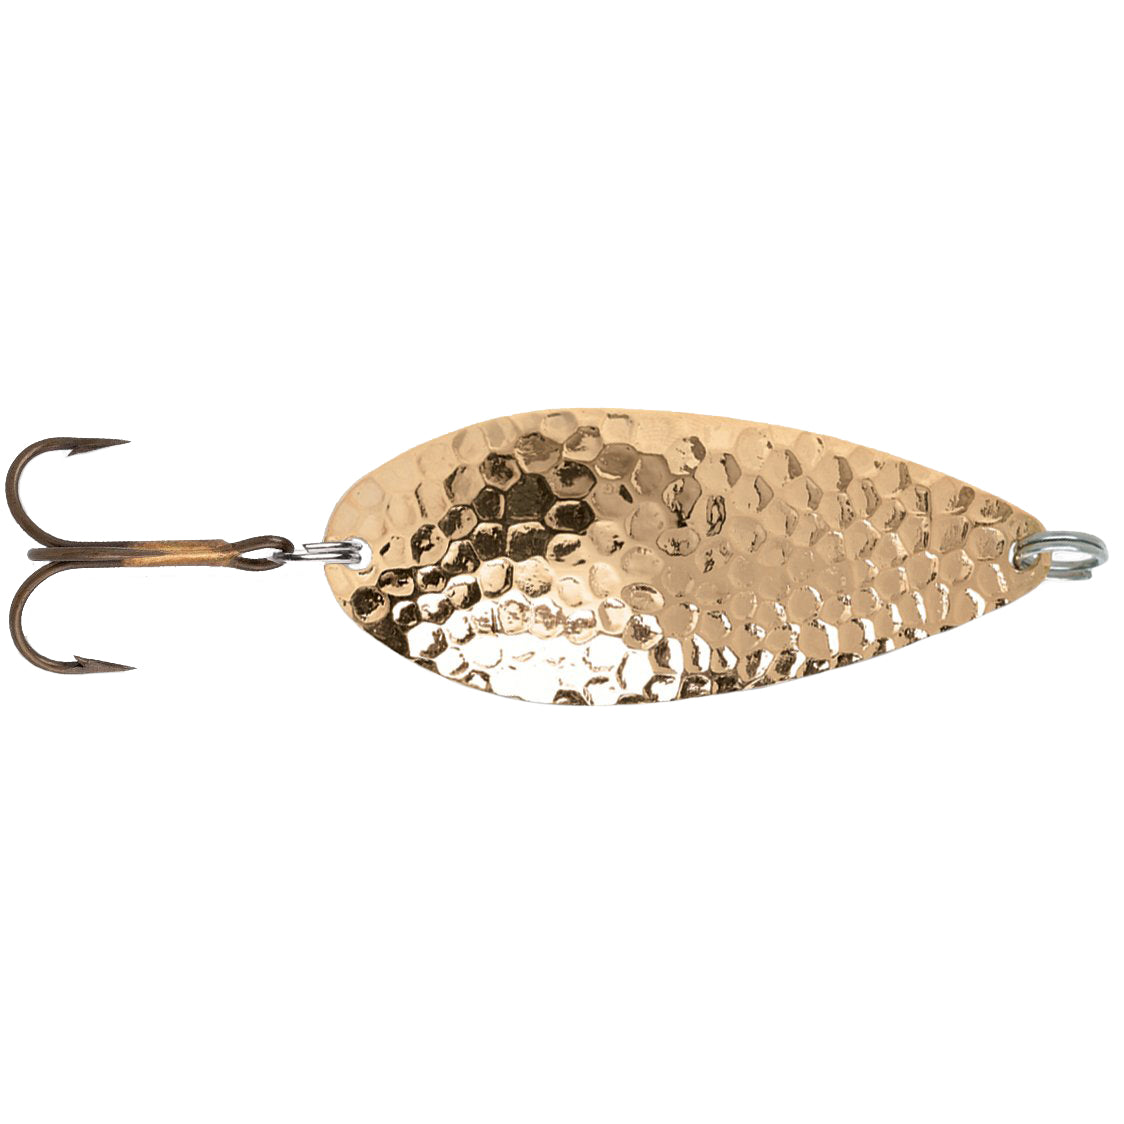 Blue Fox Moresilda Trout Series 60mm 10g Spoon Lure COLOURS